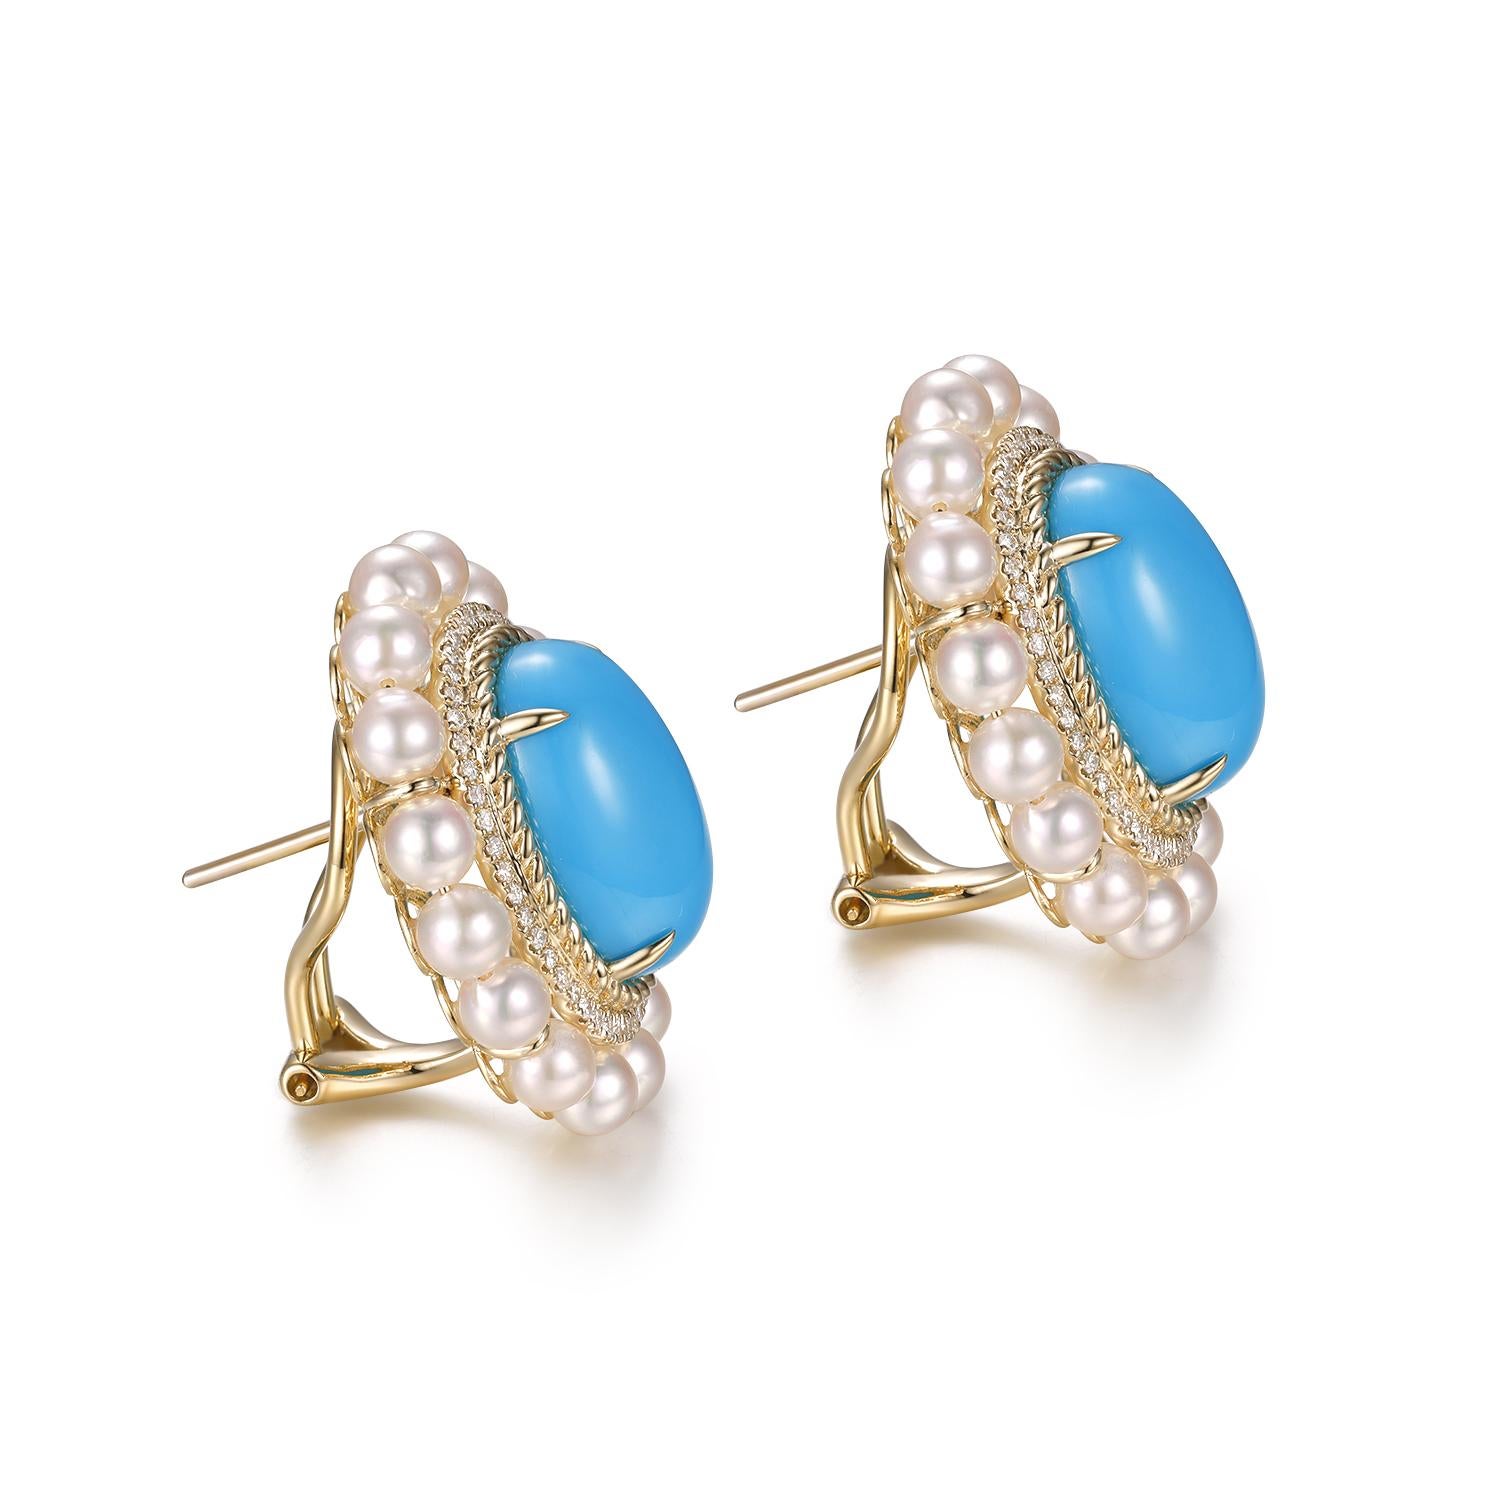 These are sumptuous earrings, crafted in 14-karat yellow gold, each centered with a turquoise stone totaling 10.40 carats for the pair. The turquoise stones boast a captivating oval cut, exhibiting a brilliant sky-blue color that conjures images of